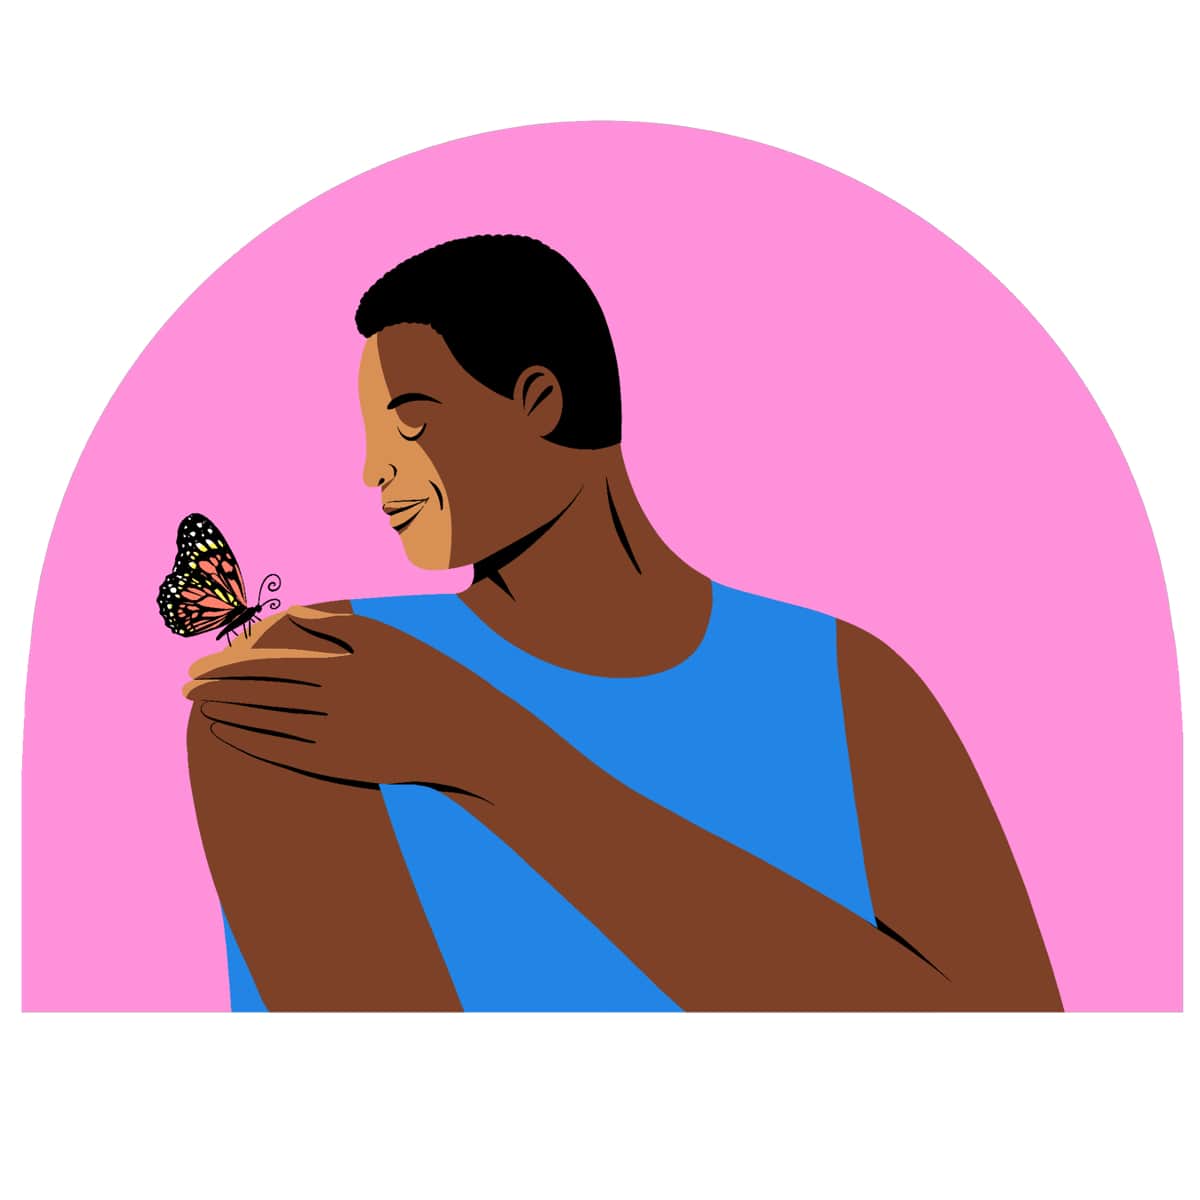 a man gently touches his shoulder where a butterfly has landed.